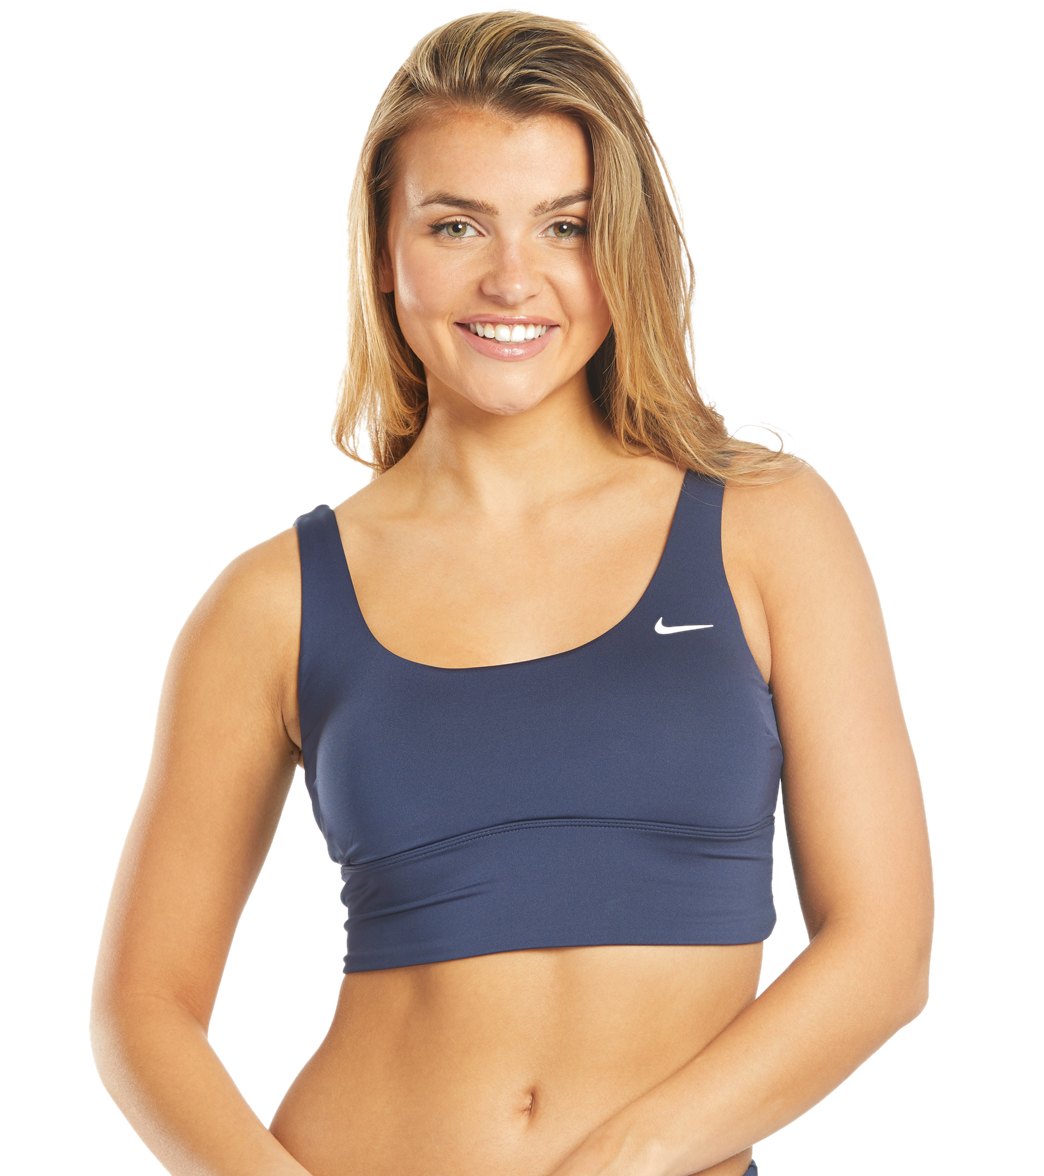 Nike Women's Essential Scoop Neck Midkini Top at